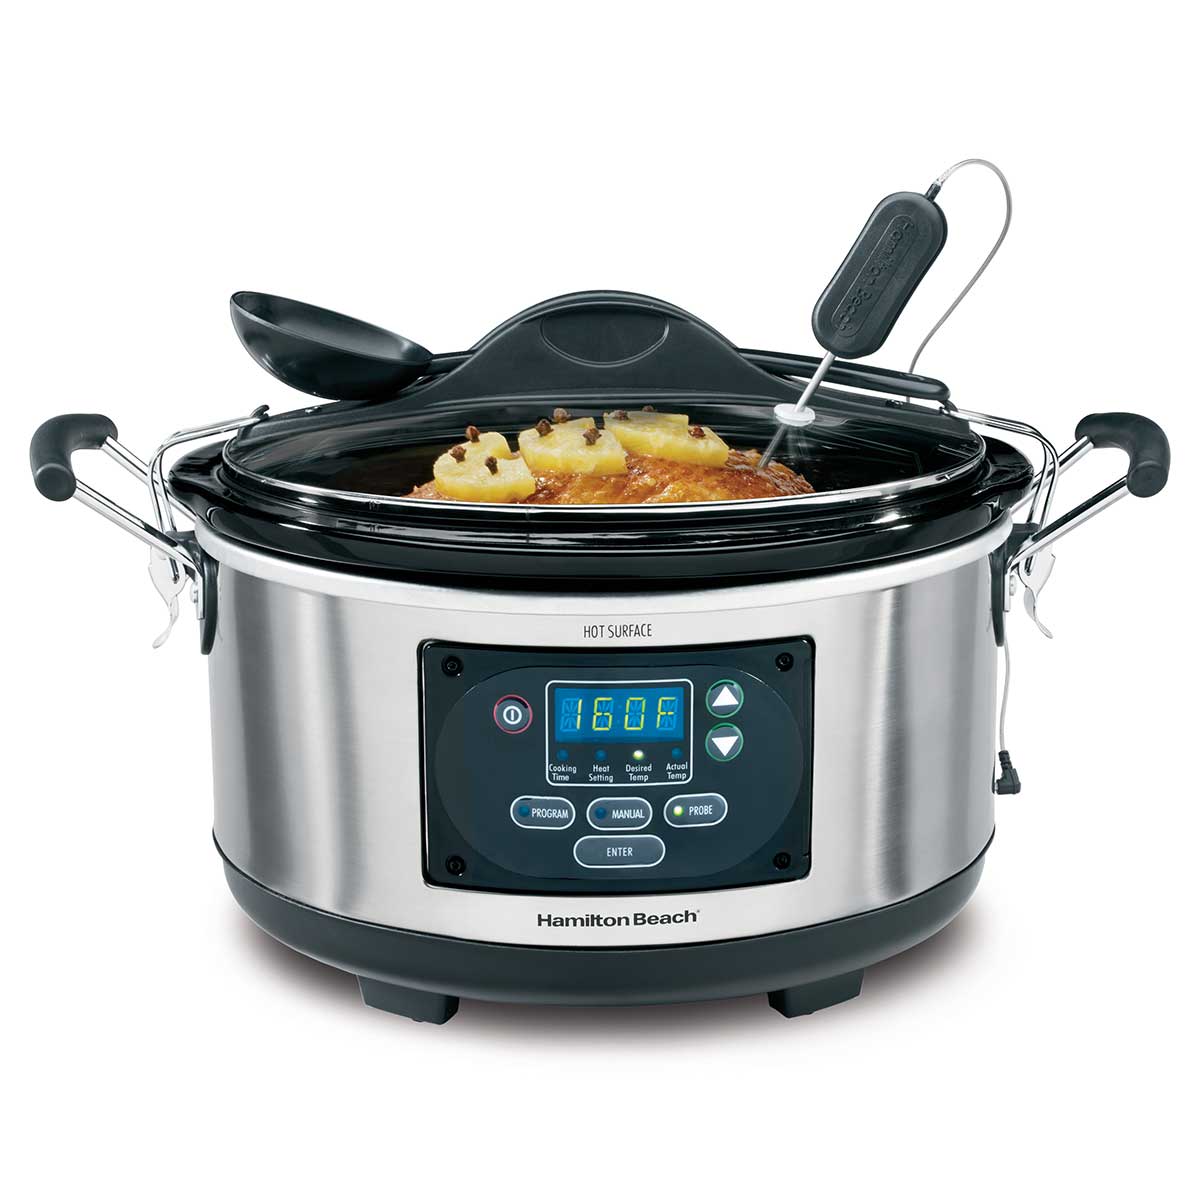 Slow Cookers with Timers